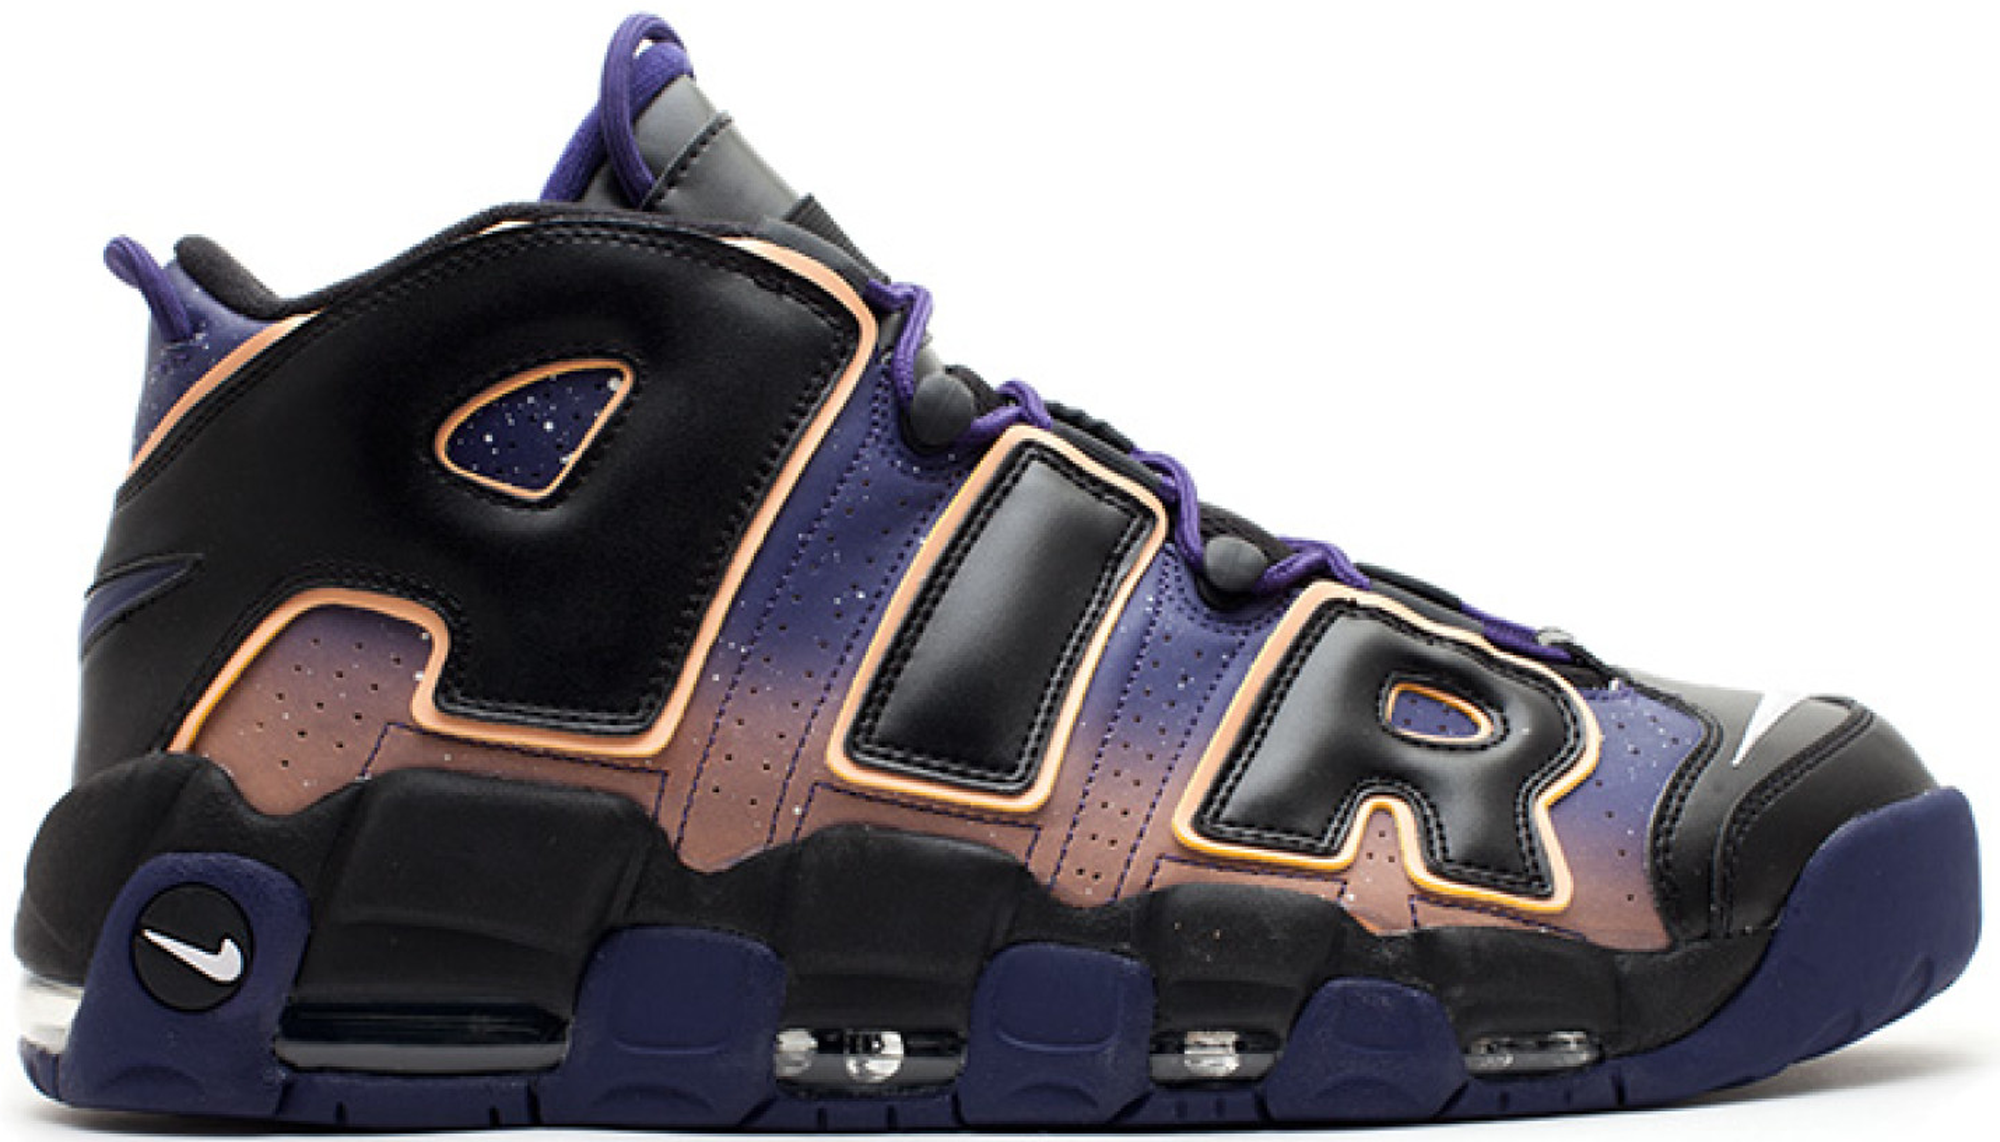 nike air more uptempo buy